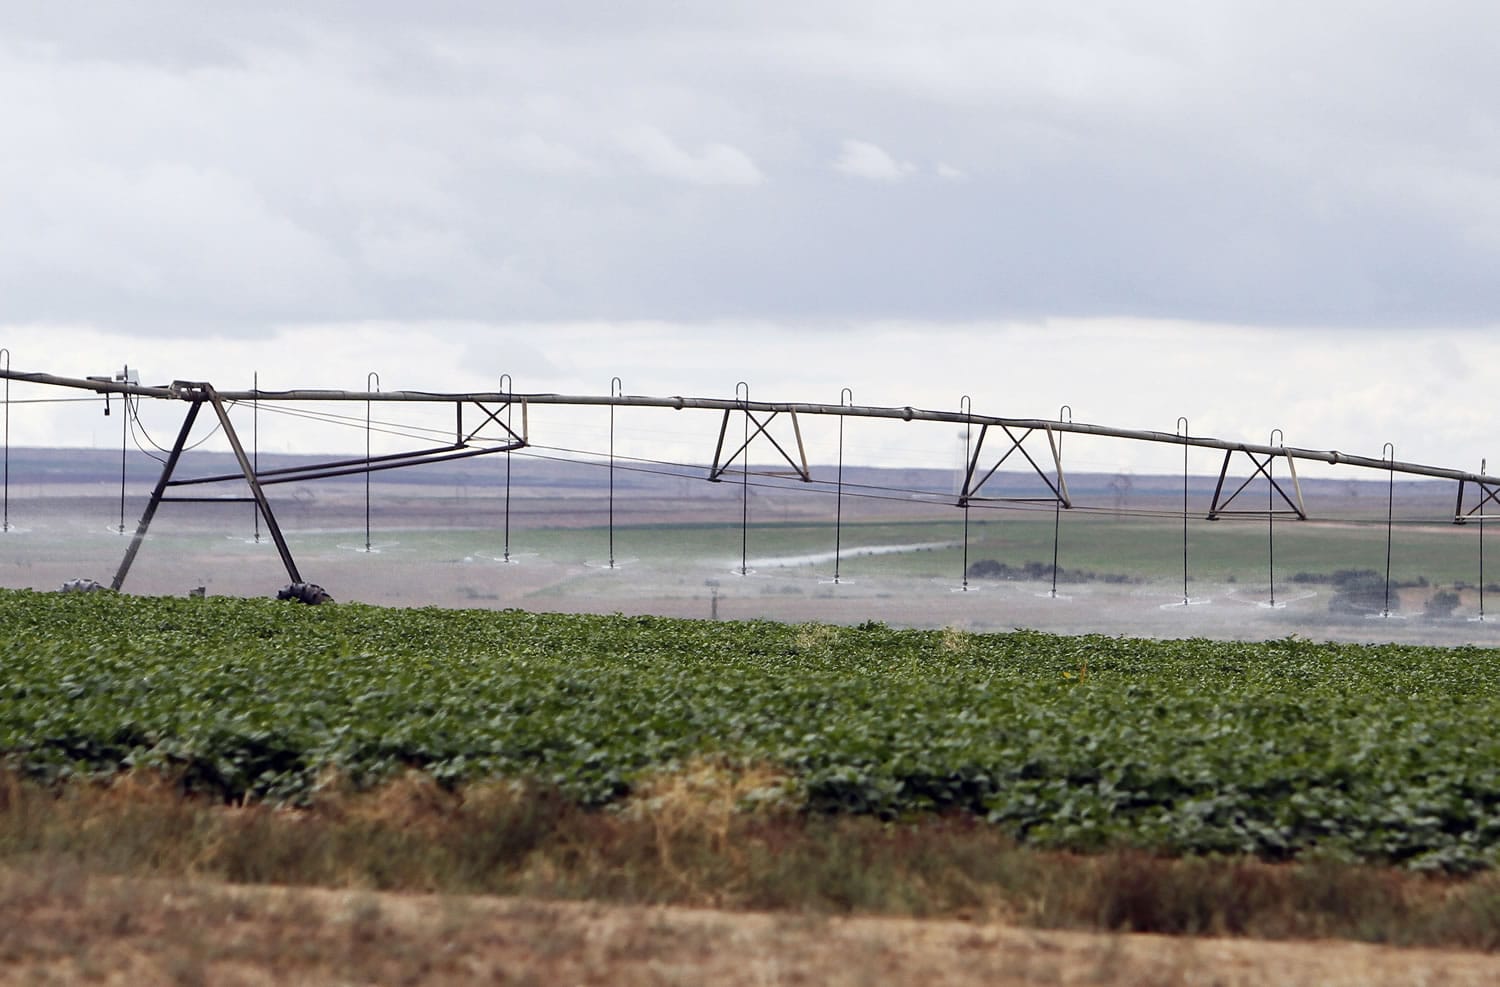 Crops are watered in August at the Navajo Agricultural Products Industry's farm south of Farmington, N.M. When the federal government announced it would allow American Indian tribes to grow and sell marijuana, the same discussions many had about casinos and alcohol resurfaced.